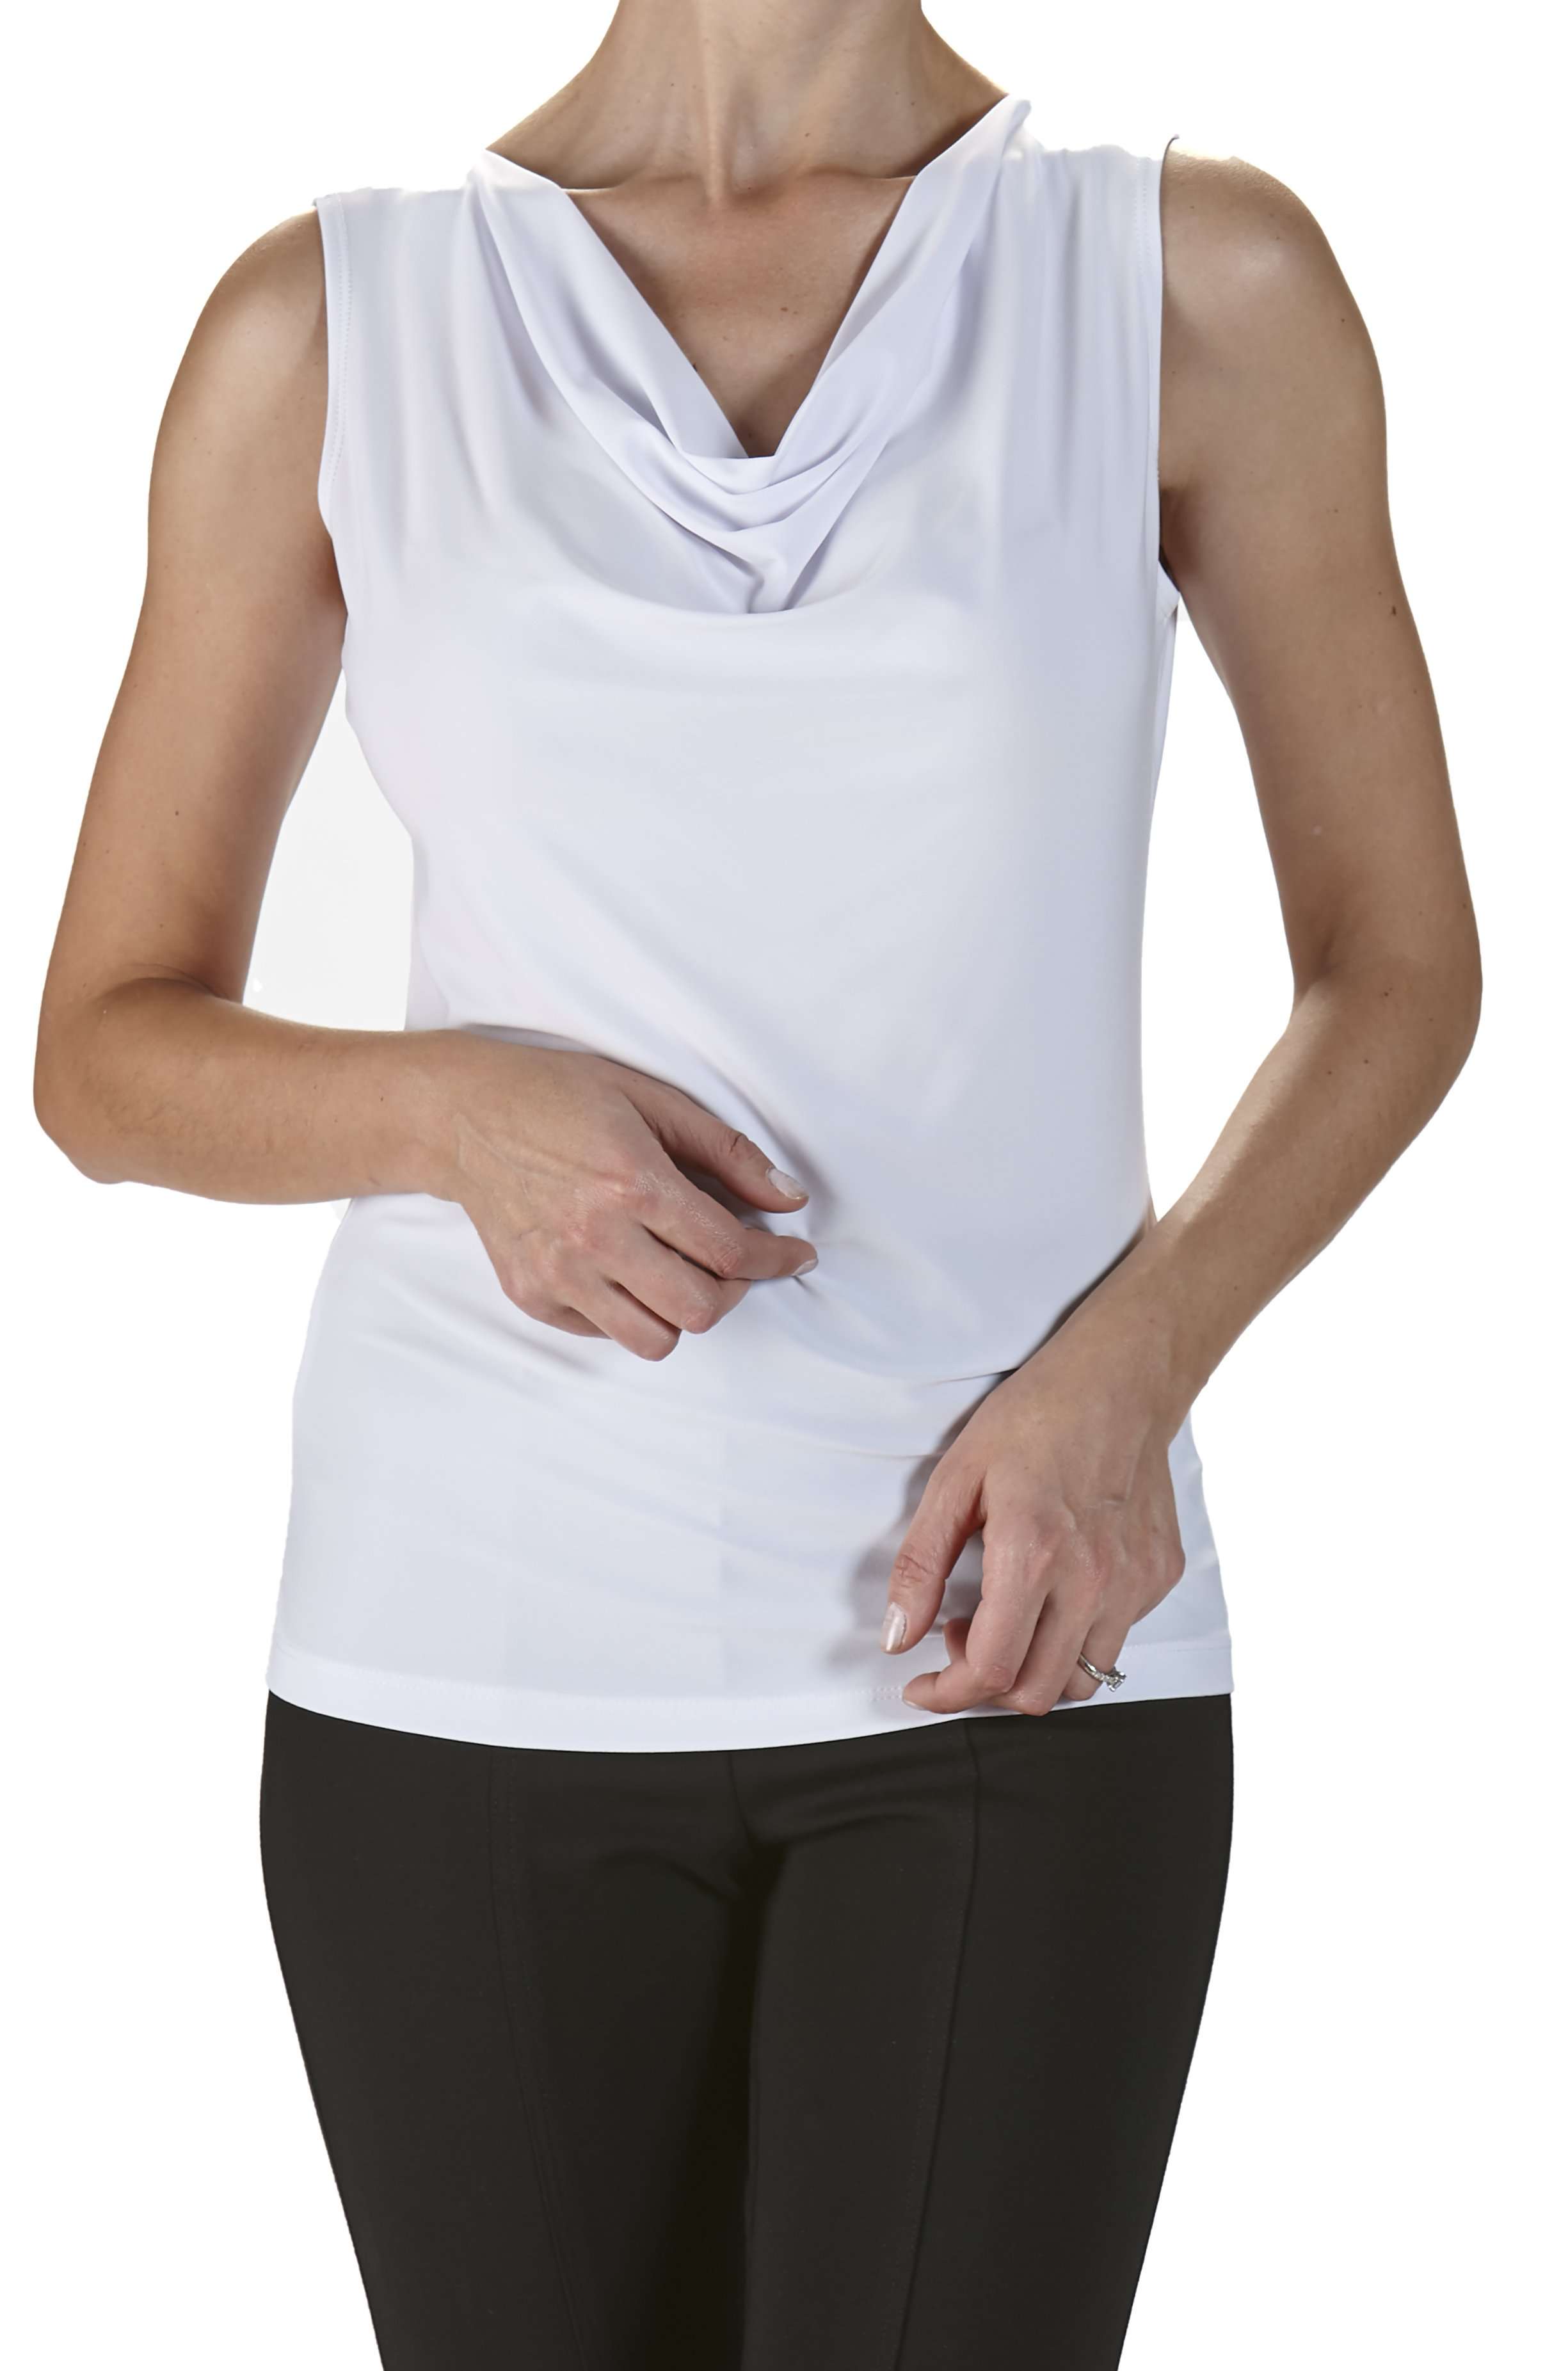 Women's White Draped Neckline Camisole Tank Top Quality Stretch Fabric Now 50% off Made in Canada - Yvonne Marie - Yvonne Marie